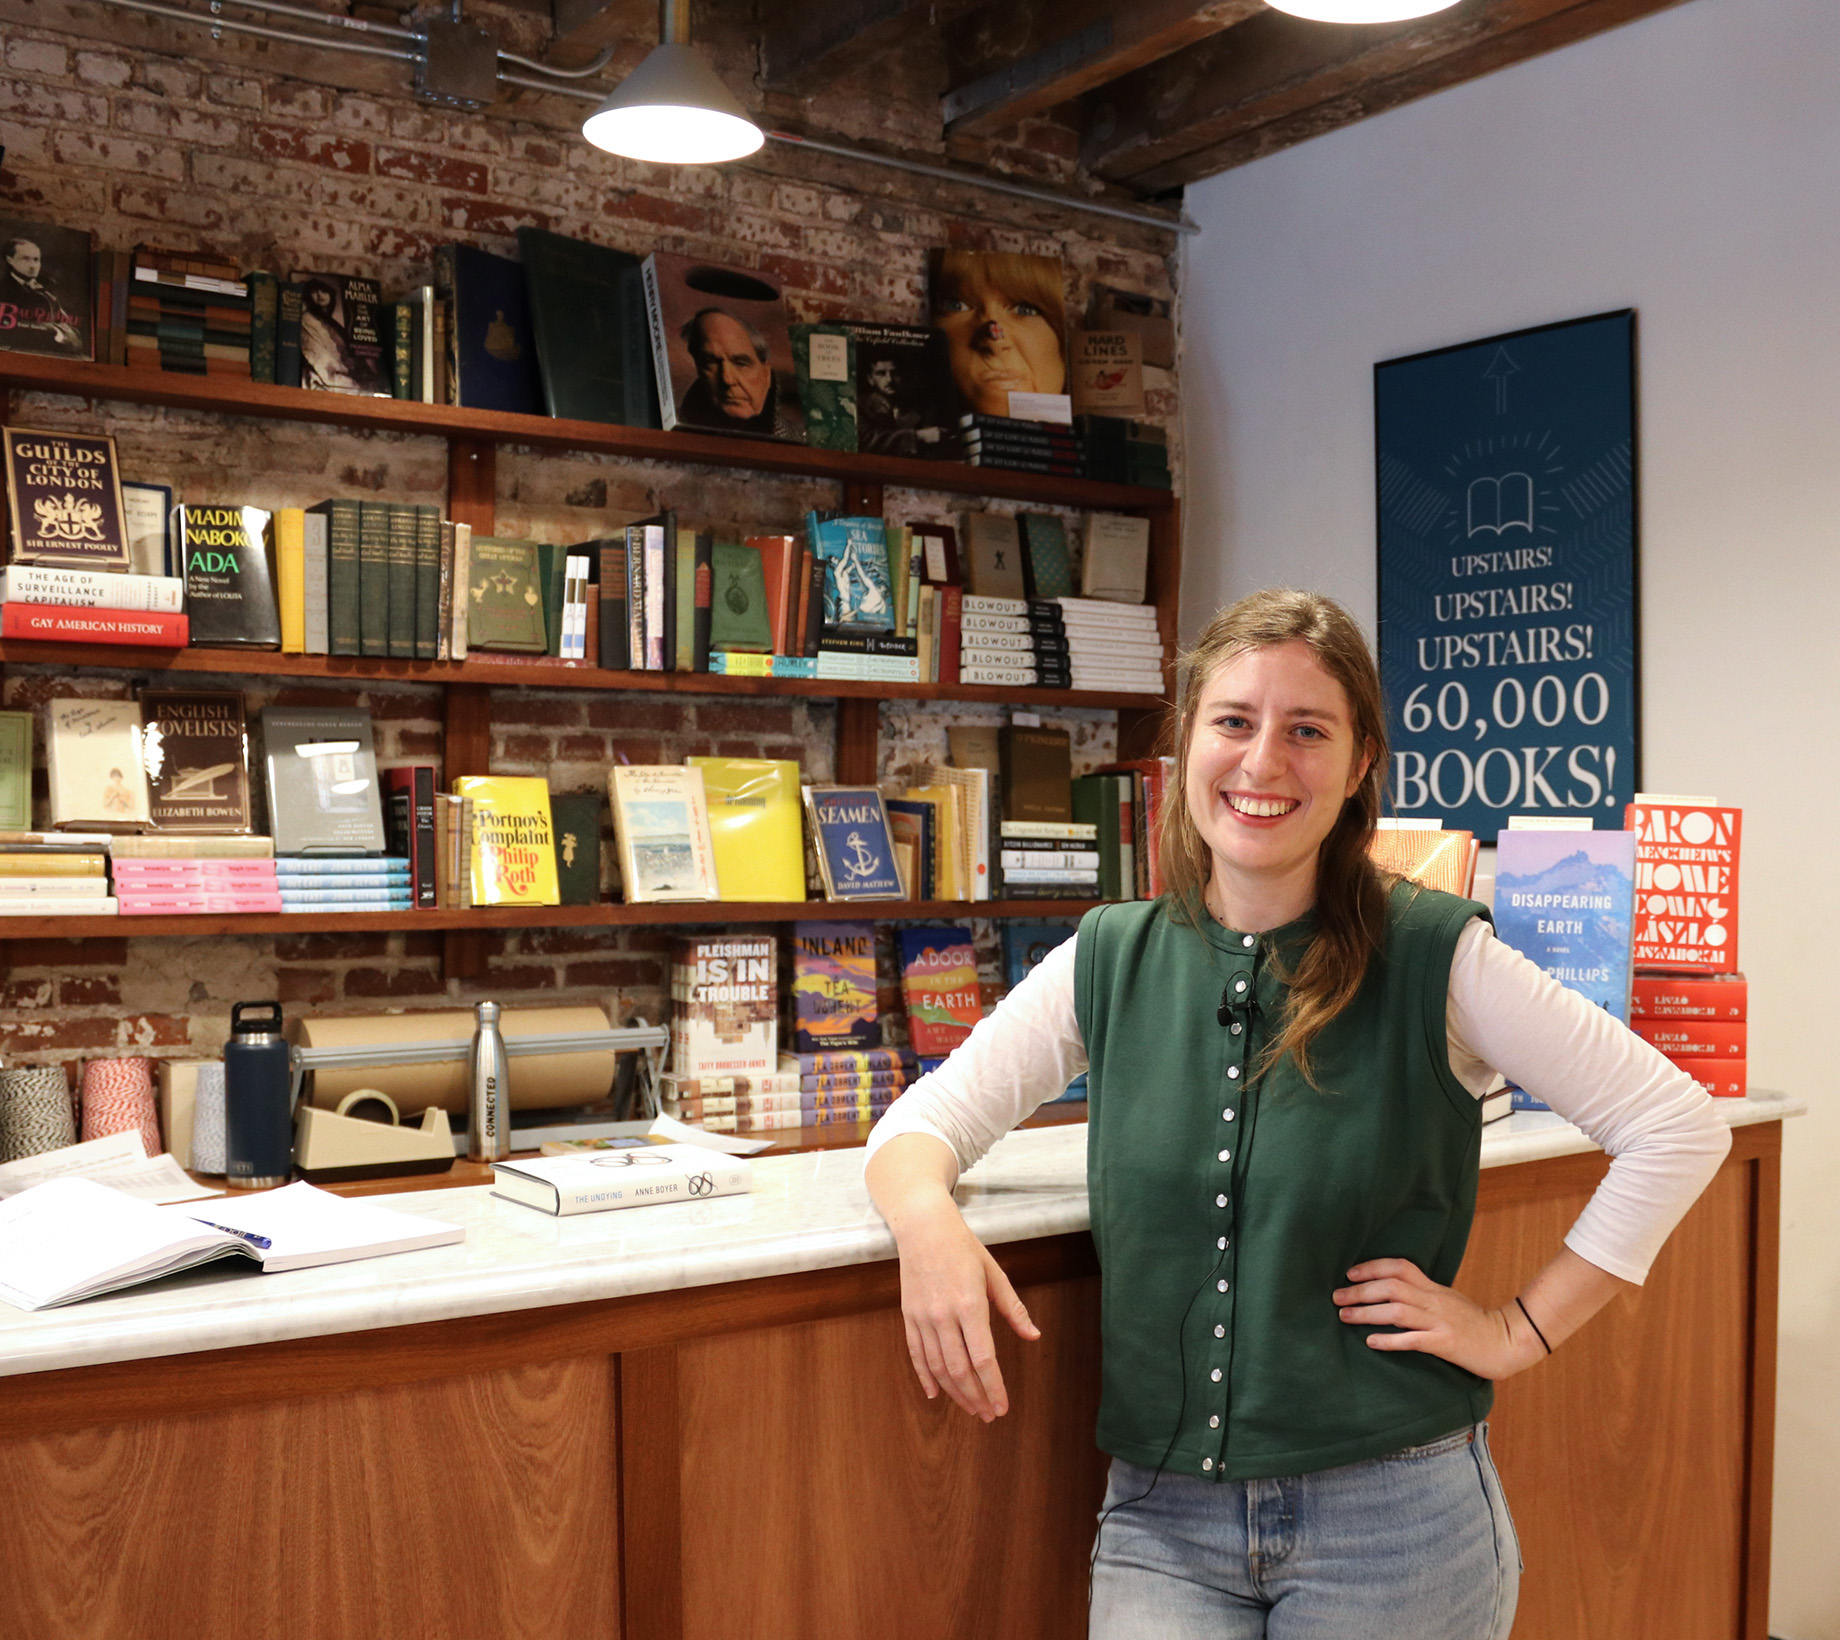 McNally Jackson Booksellers Brings 60,000 Eclectic Titles To The Seaport